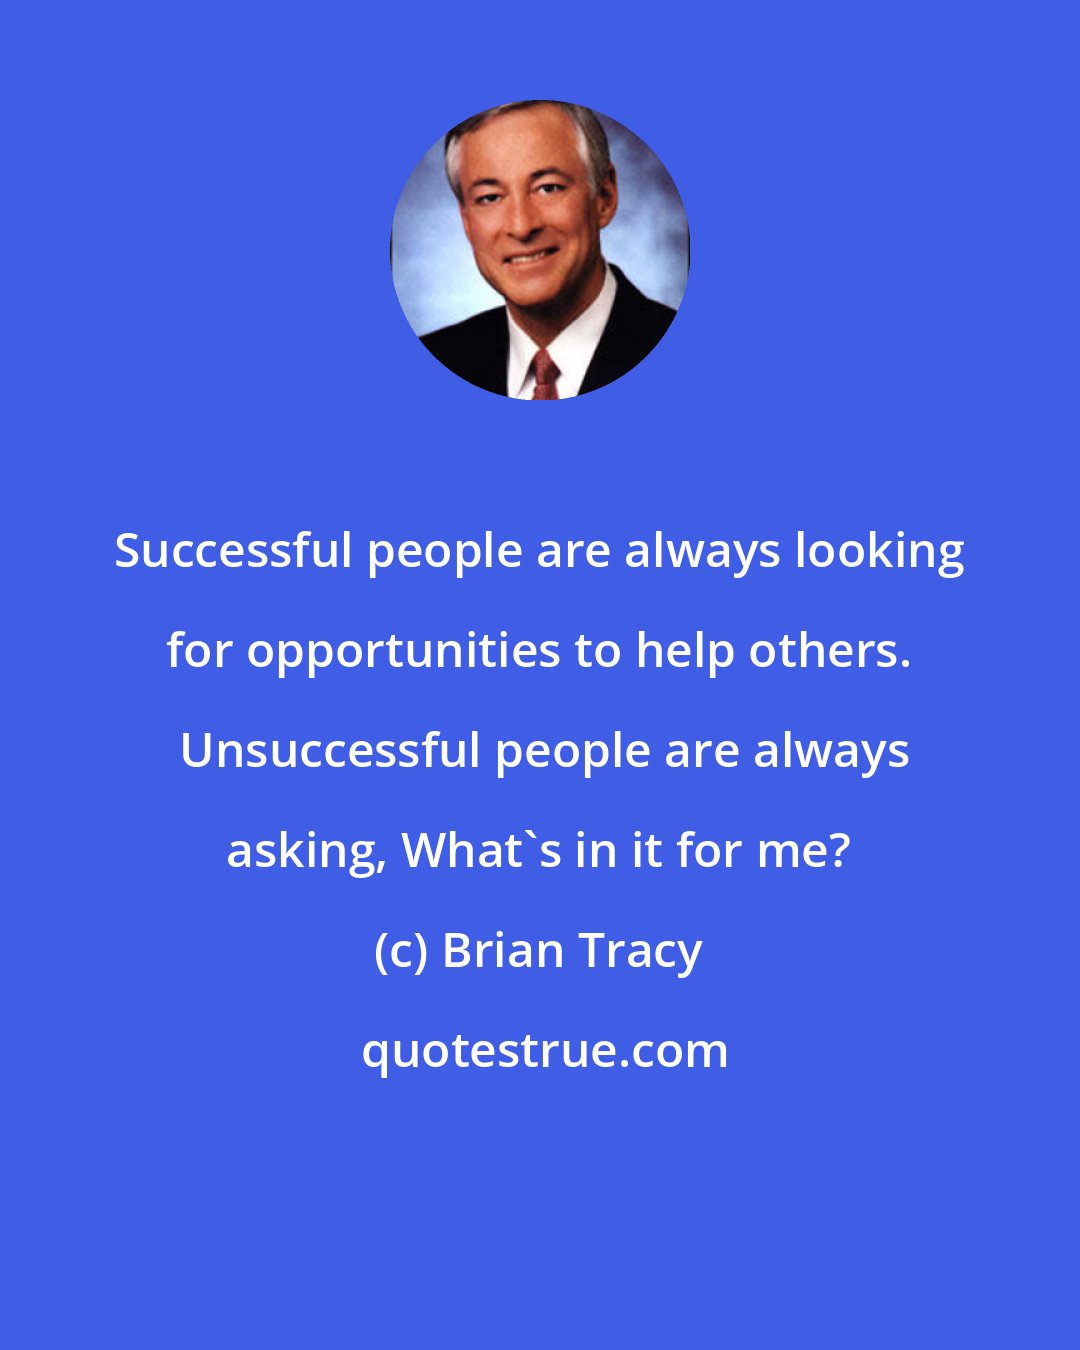 Brian Tracy: Successful people are always looking for opportunities to help others.  Unsuccessful people are always asking, What's in it for me?